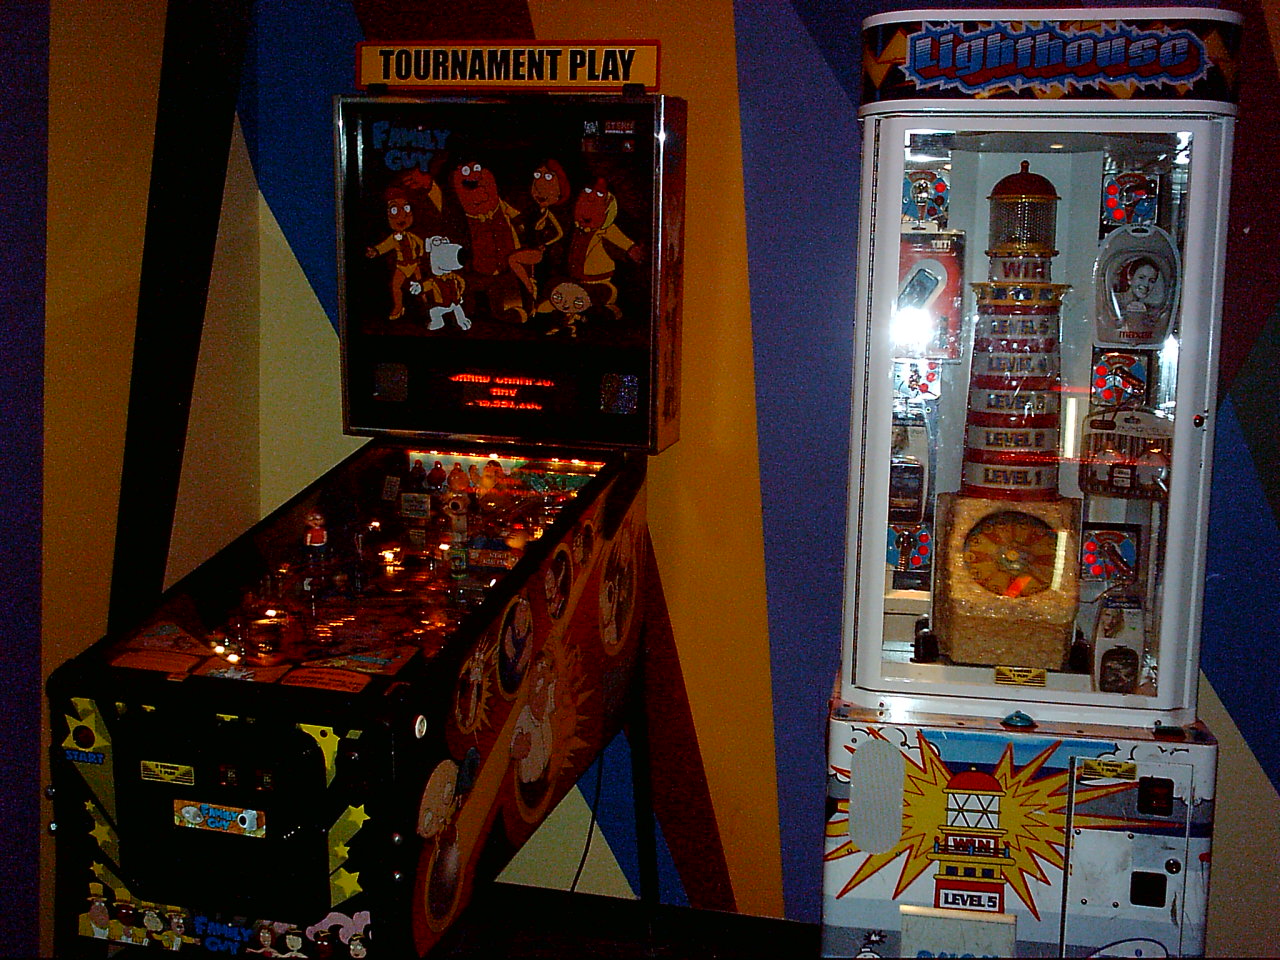 Golden Nugget Las Vegas - Have you ever played Pinball?